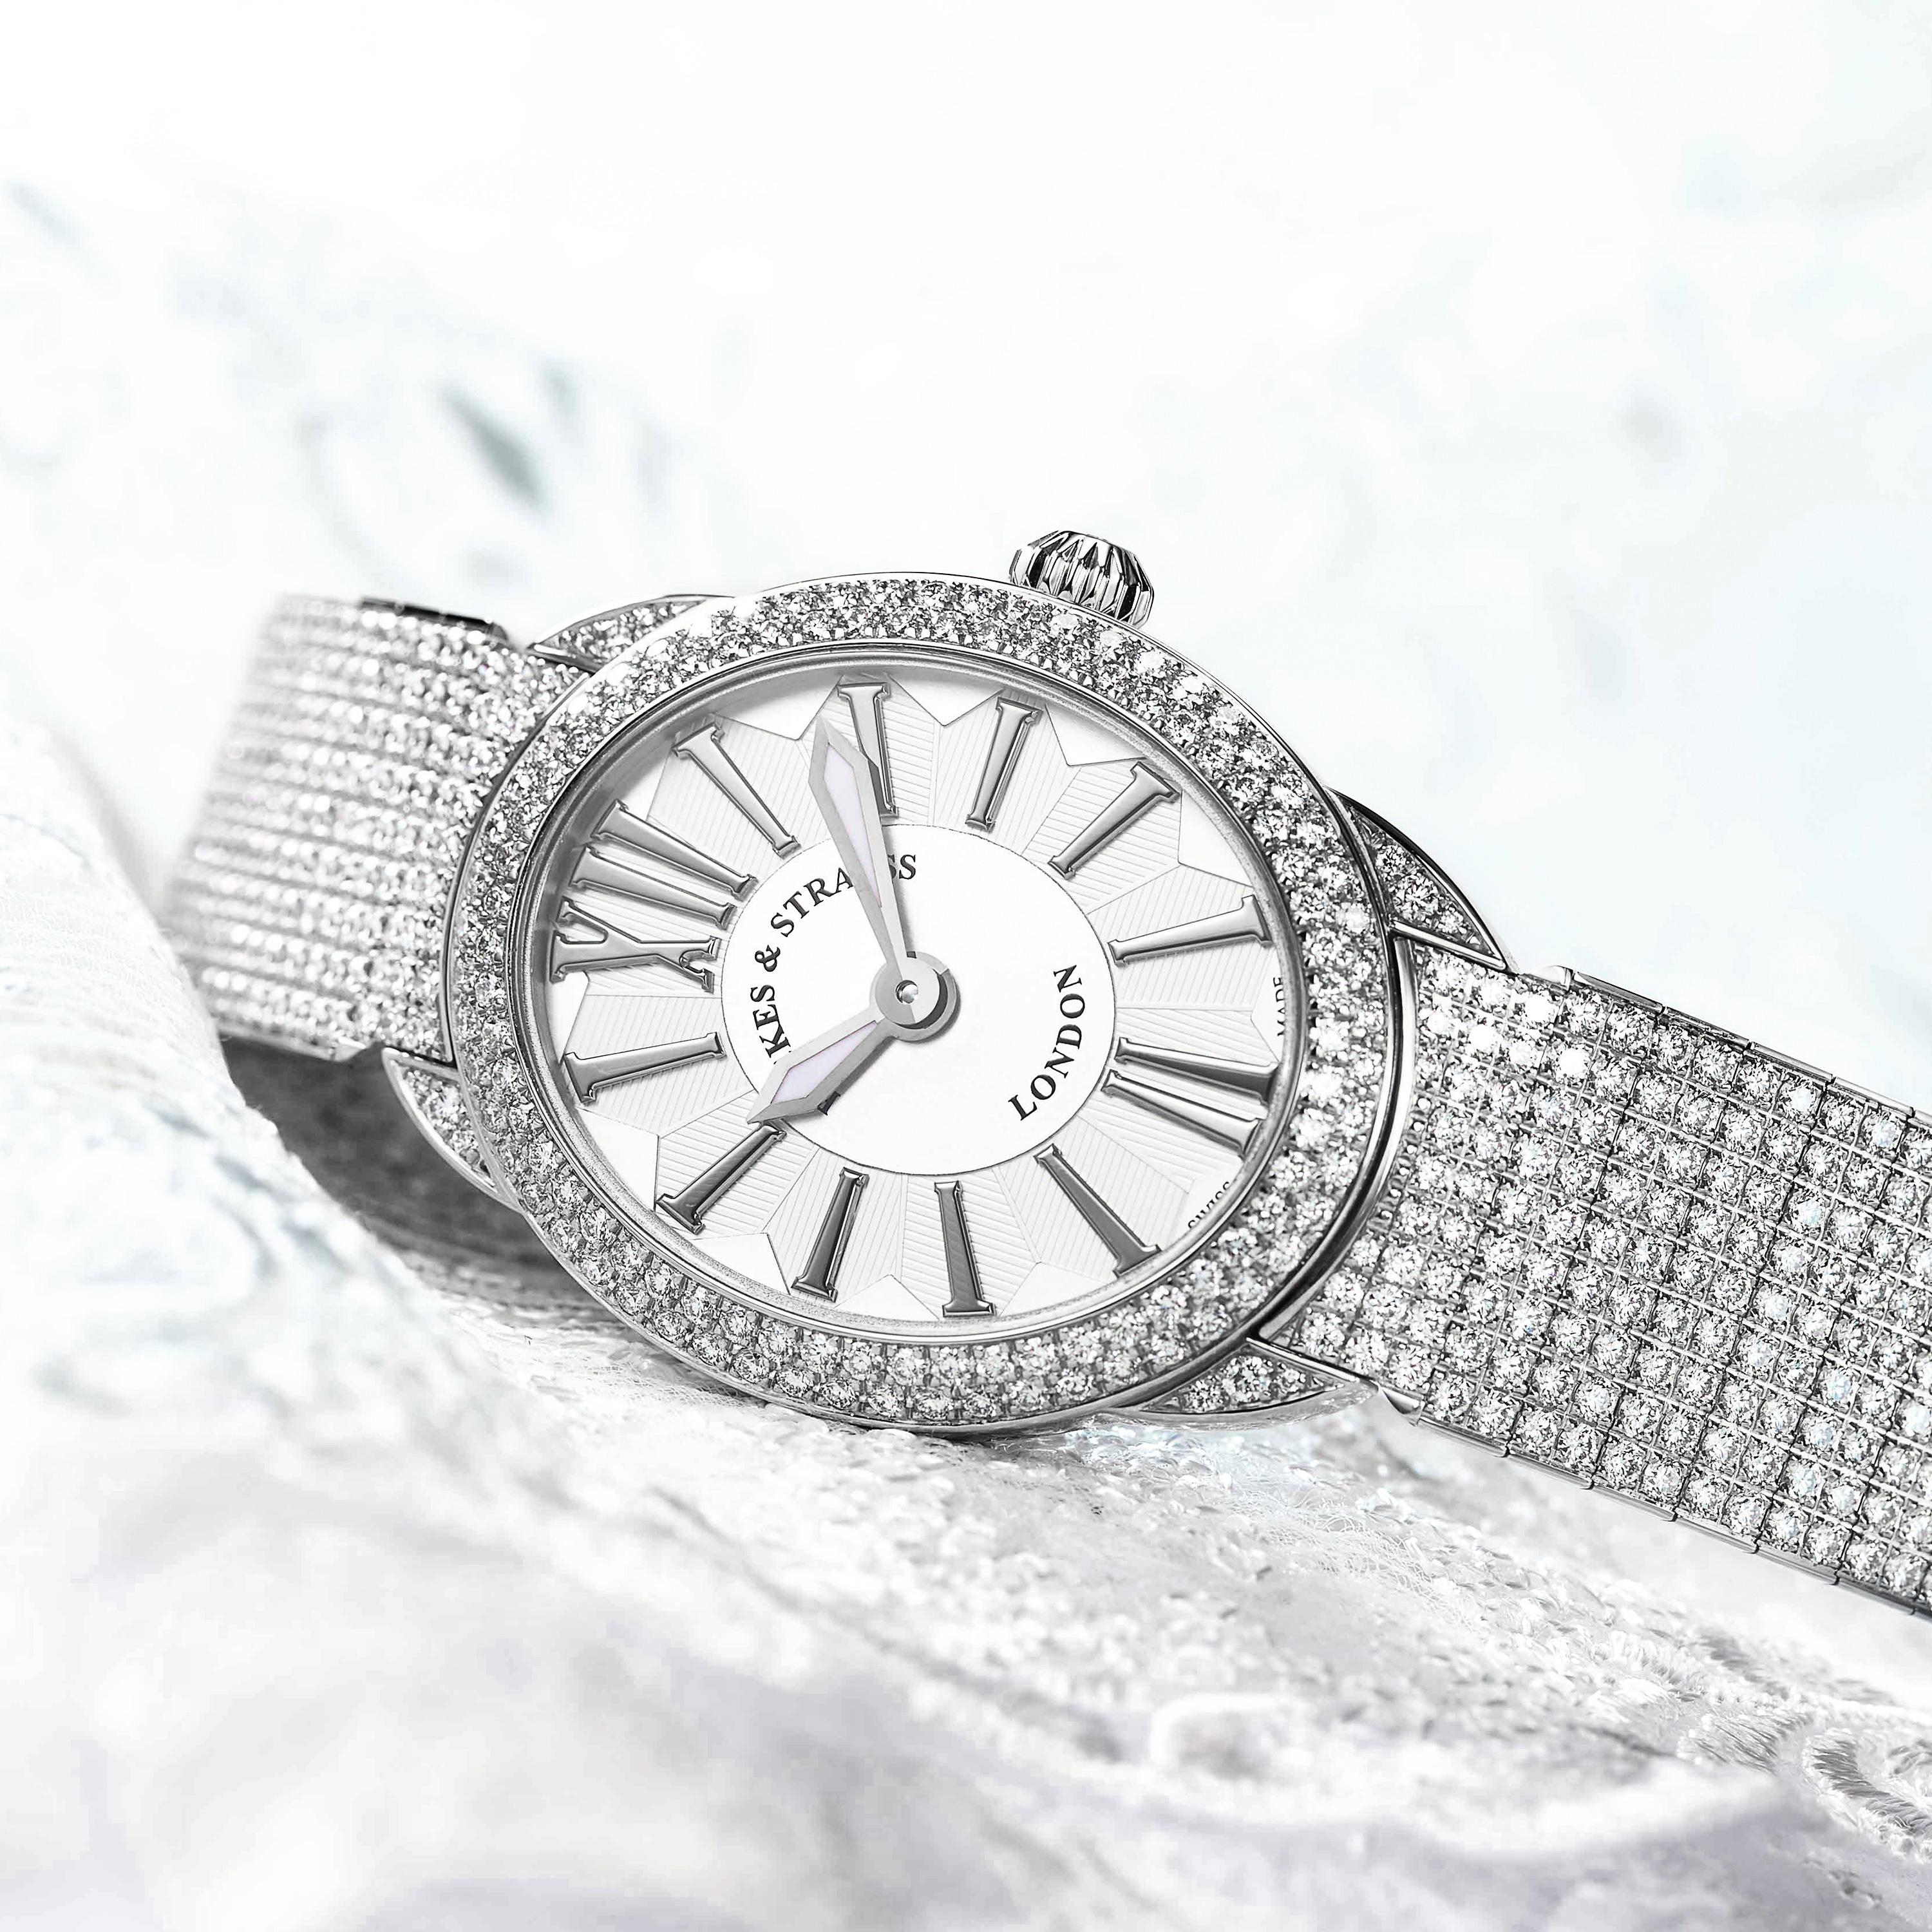 The Regent Renaissance Ballerina 2833 is a luxury diamond watch for women crafted in 18kt White gold, featuring the white oval dial, mechanical movement. The case, bracelet and crown are set with white Ideal Cut diamonds. It is a 28 mm x 33 mm slim